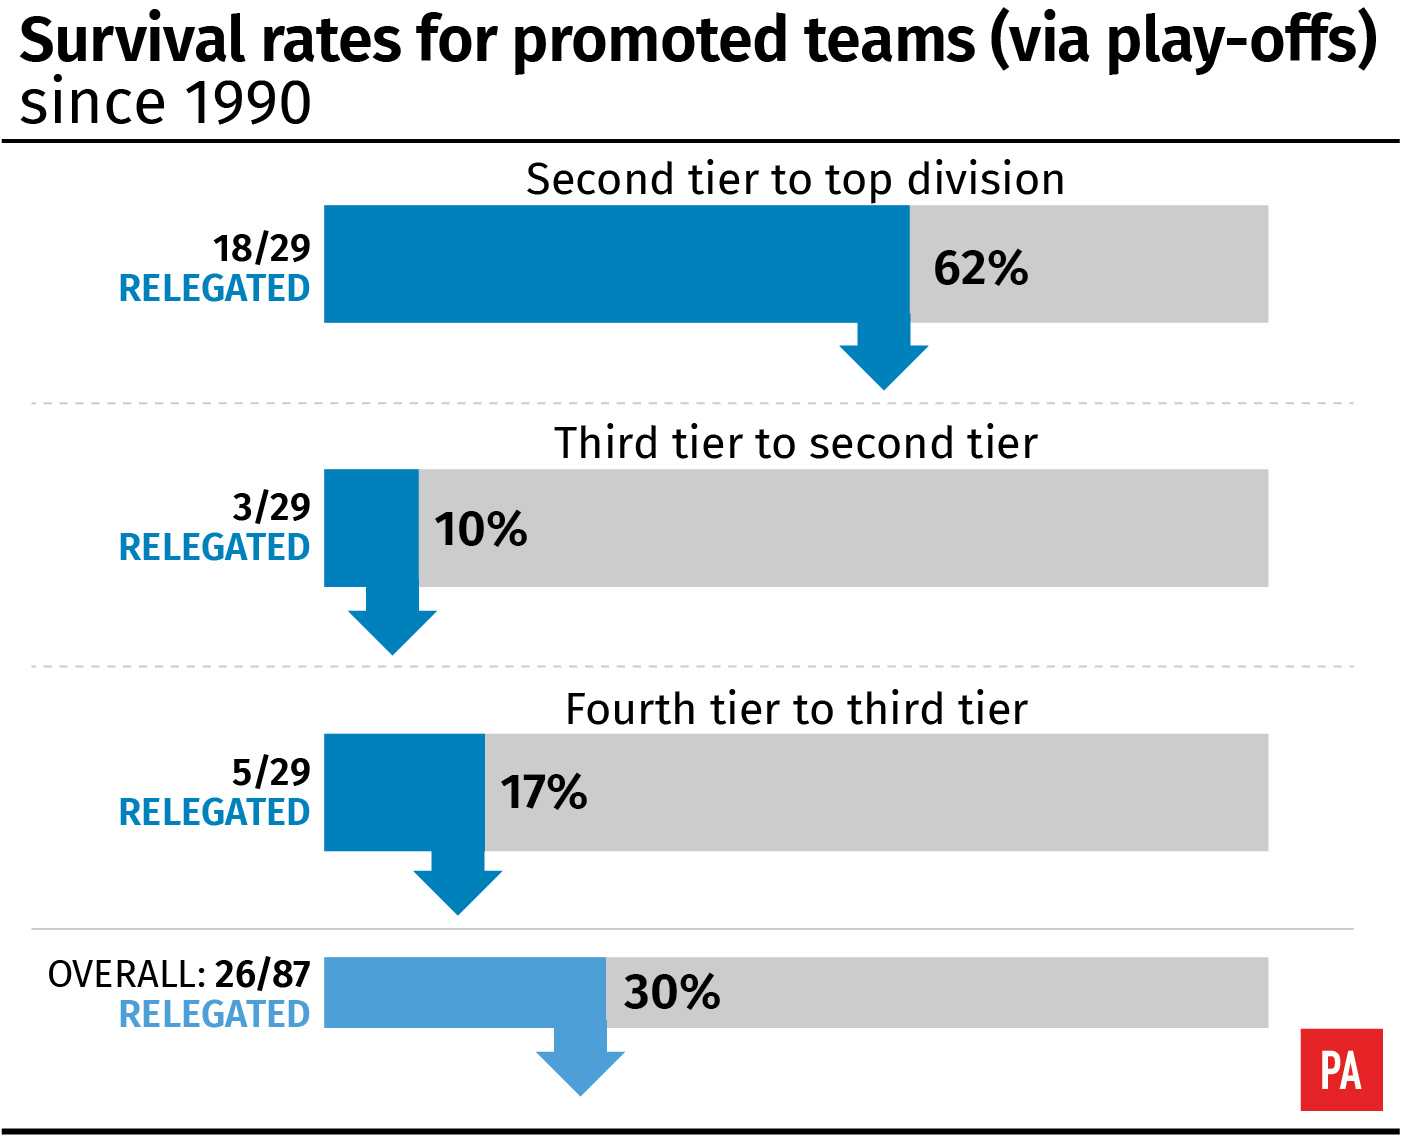 Graphic showing the survival rates for clubs promoted via the play-offs